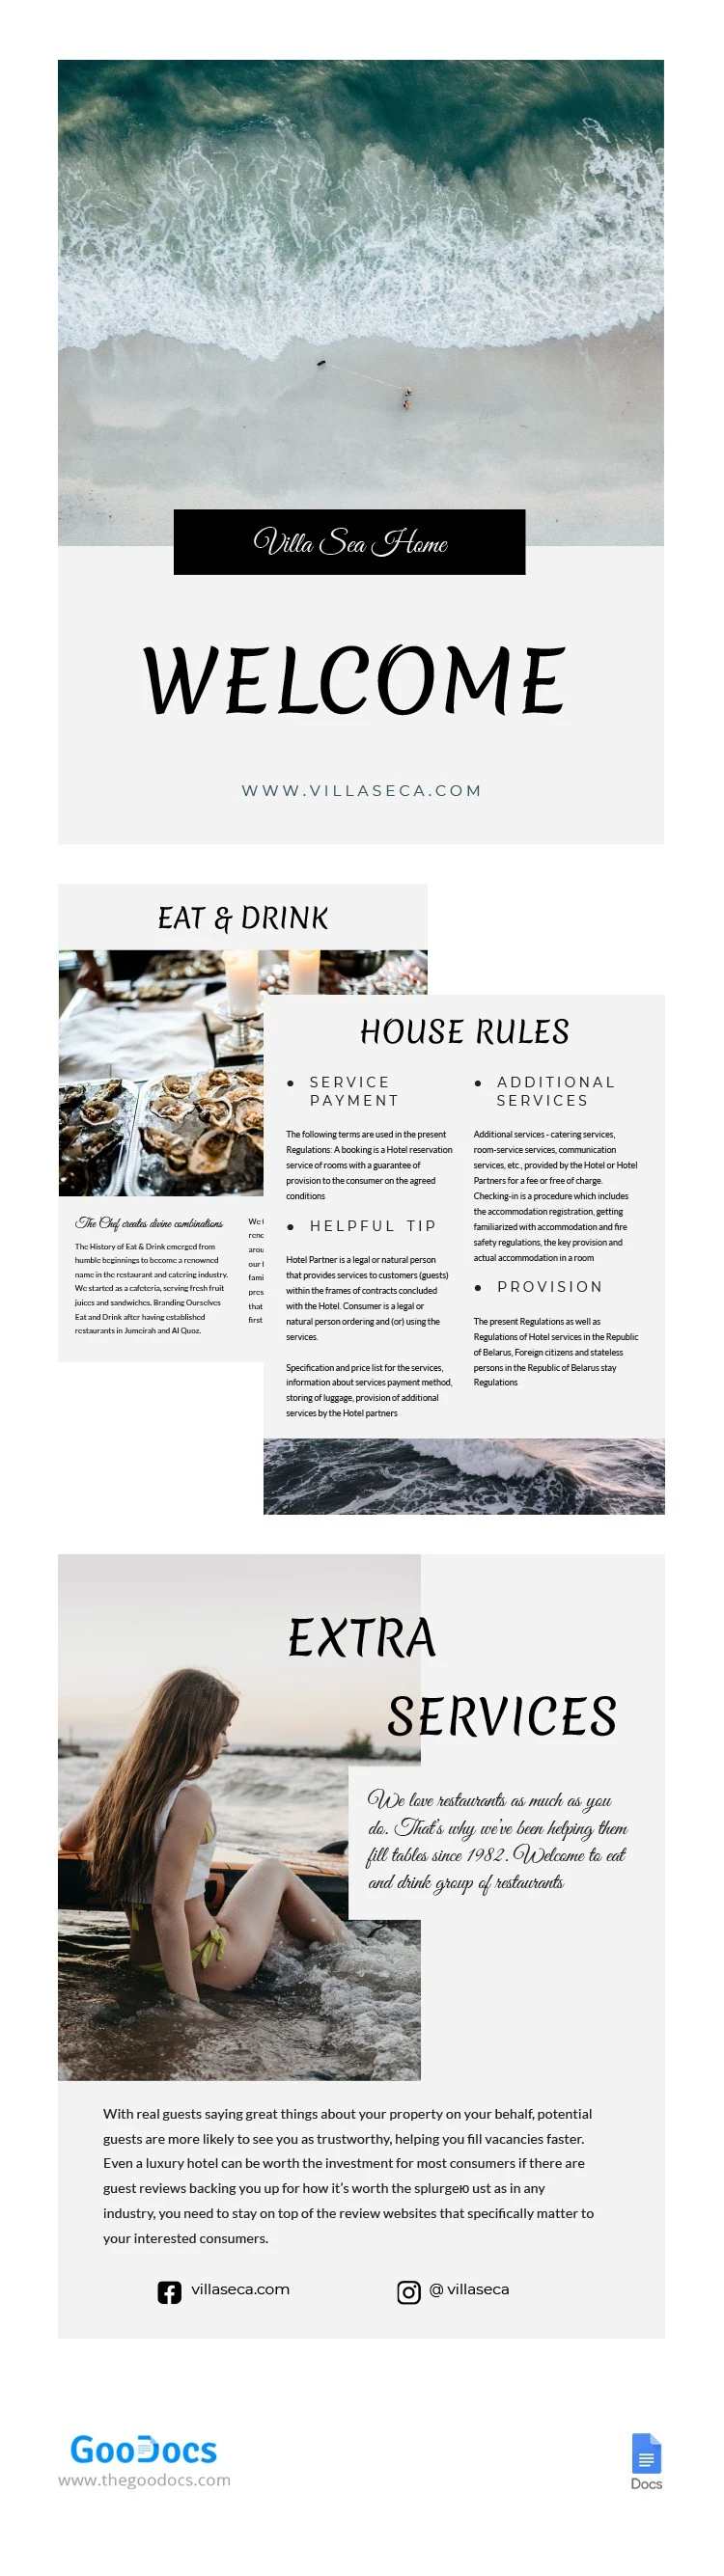 Stylish Airbnb Welcome Book - free Google Docs Template - 10062210